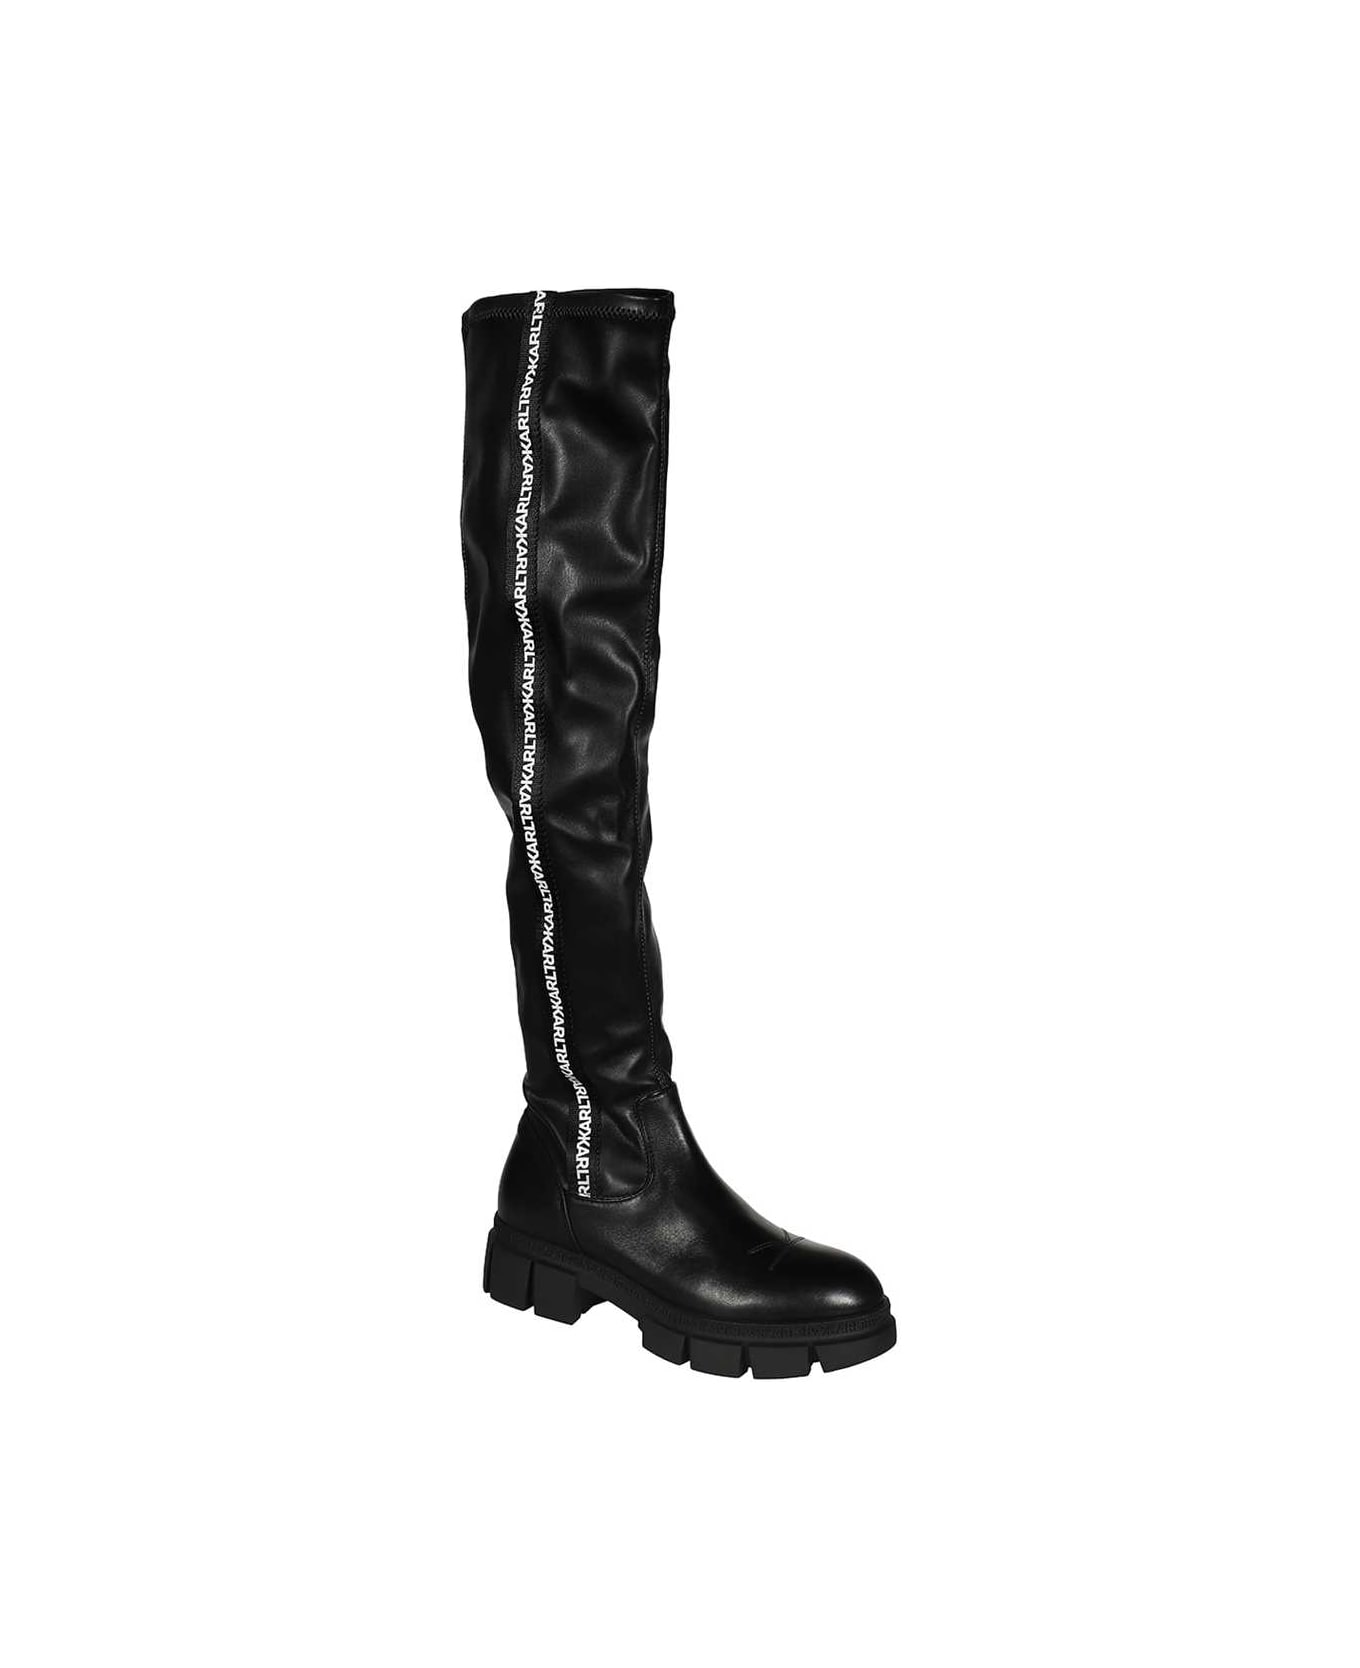 Karl Lagerfeld Over-the-knee Boots - black ブーツ